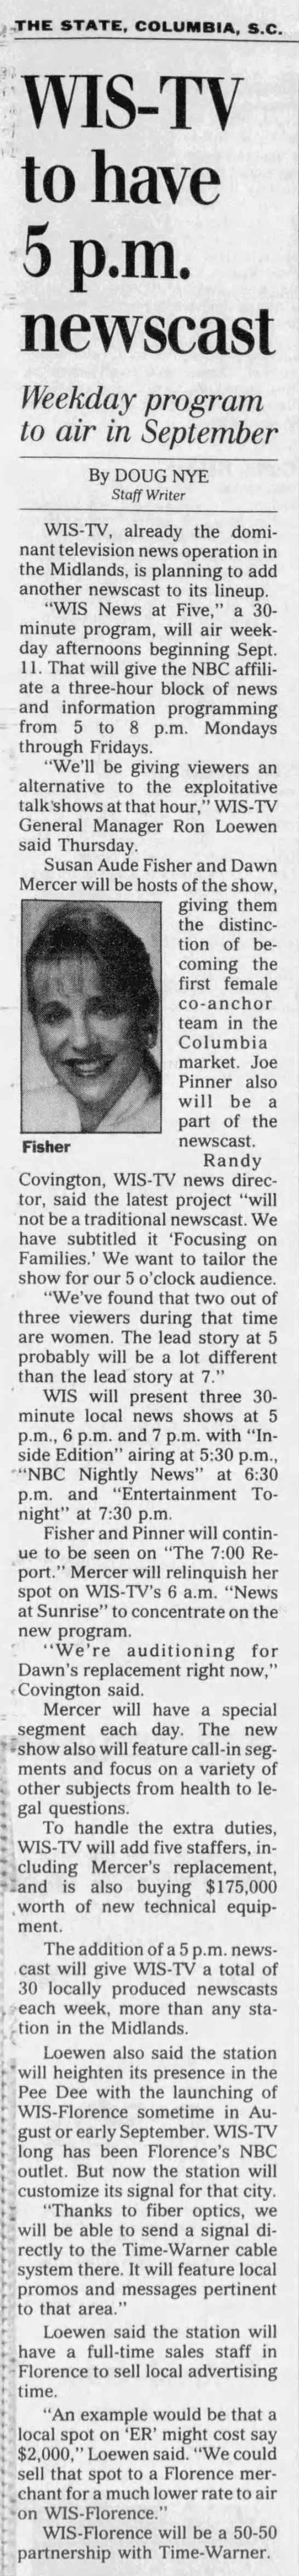 WIS-TV to have 5 p.m. newscast: Weekday program to air in September - 